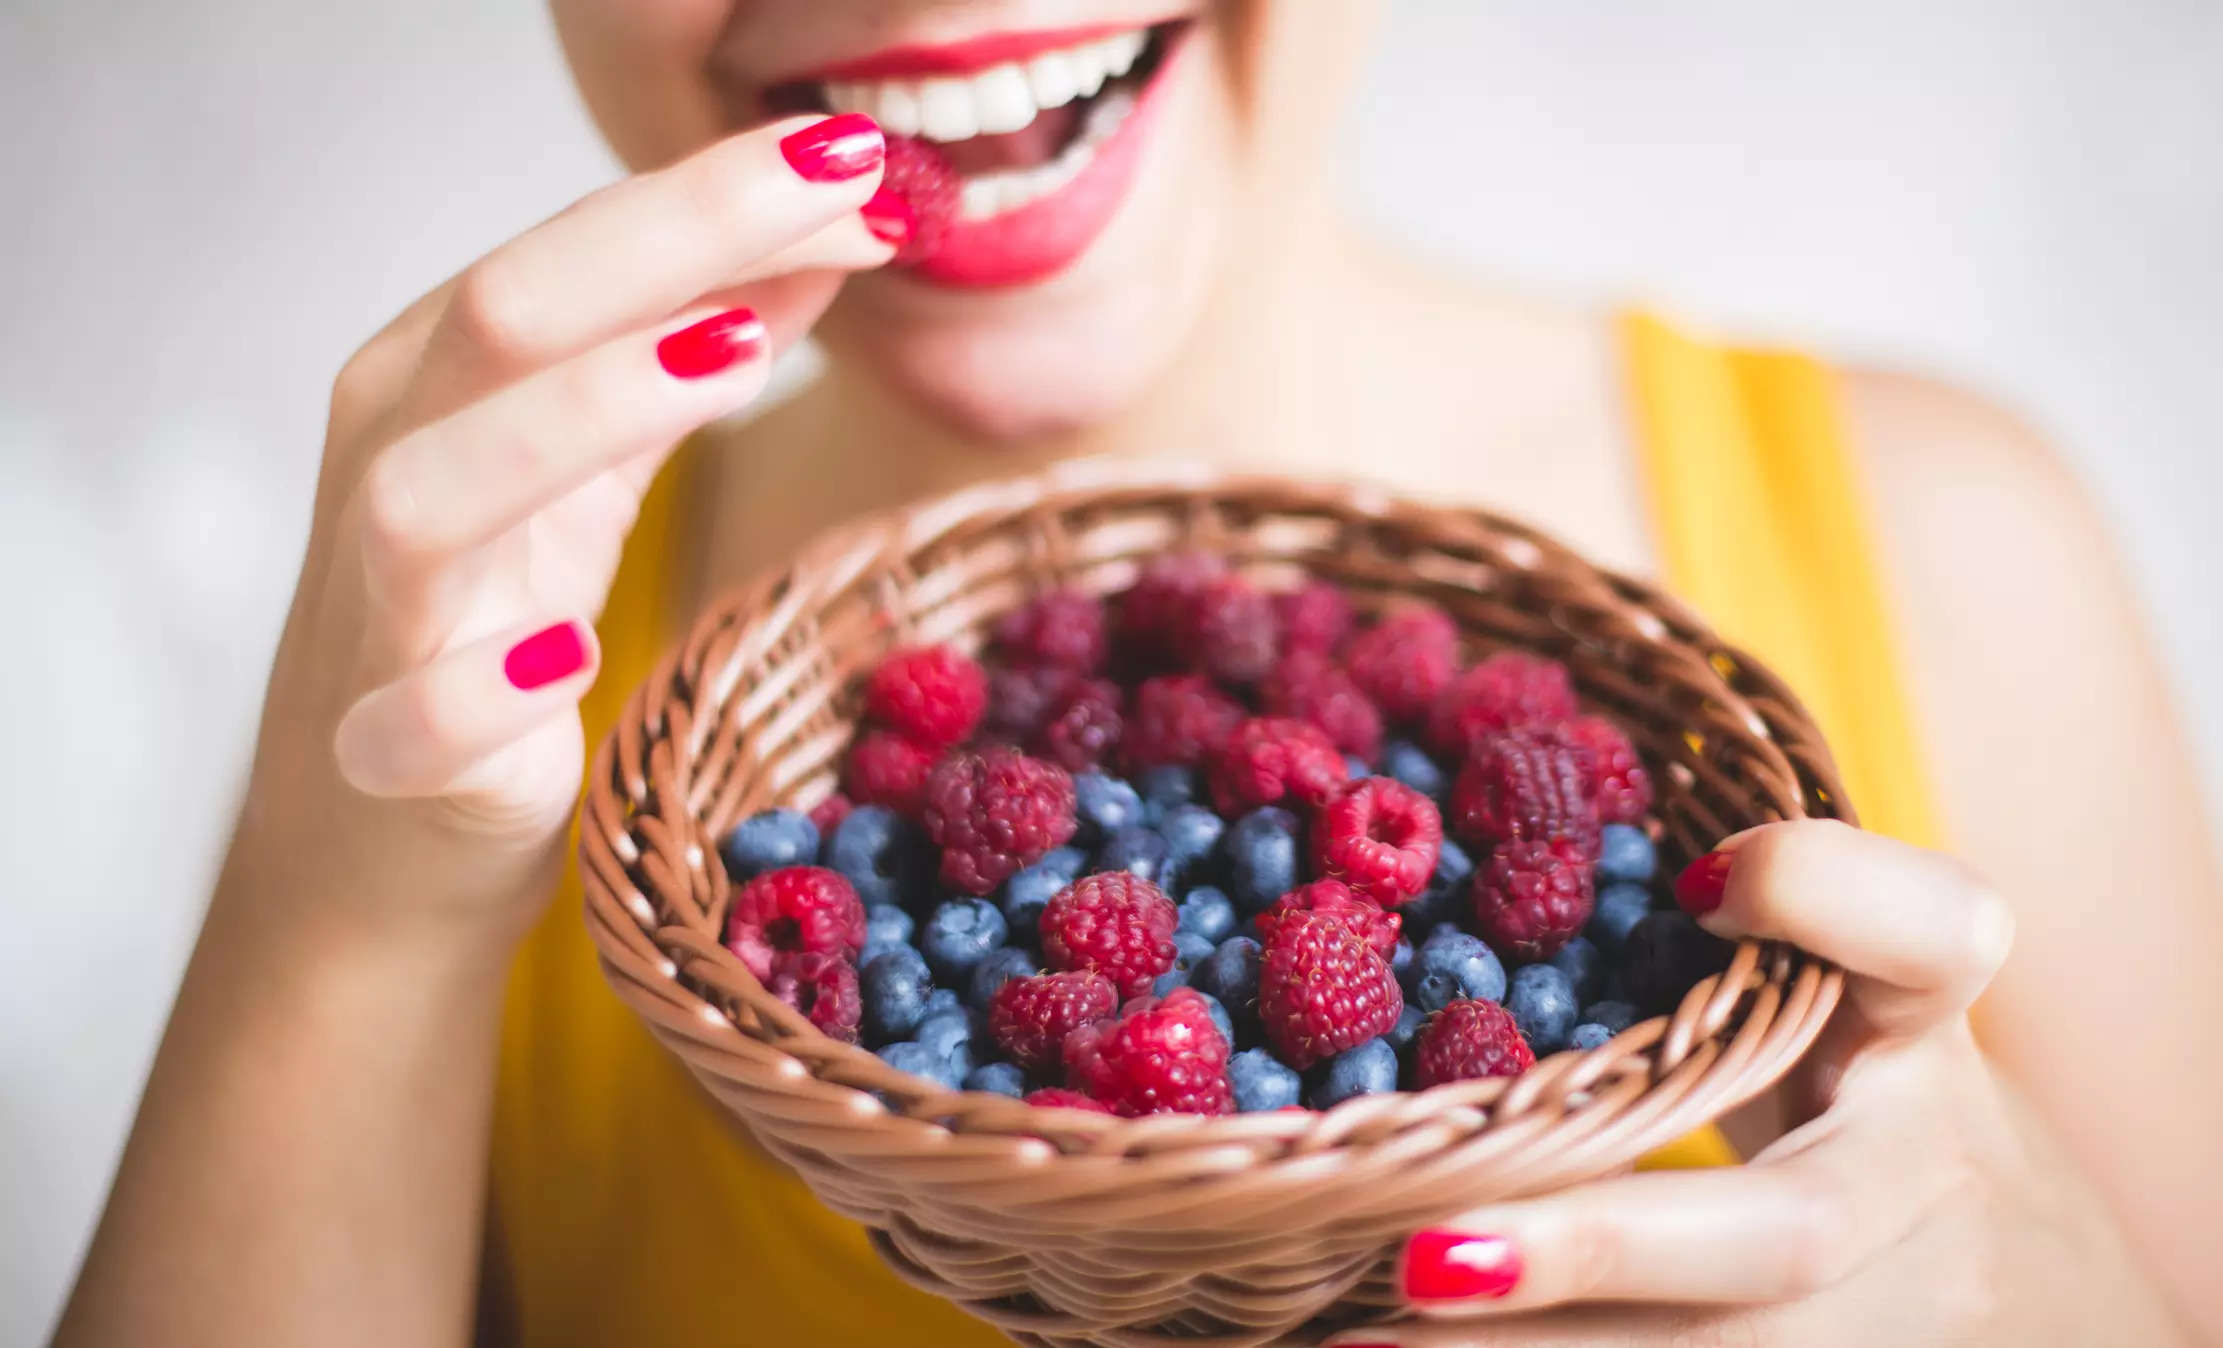 I can't get enough of berries This is the best variety for weight loss